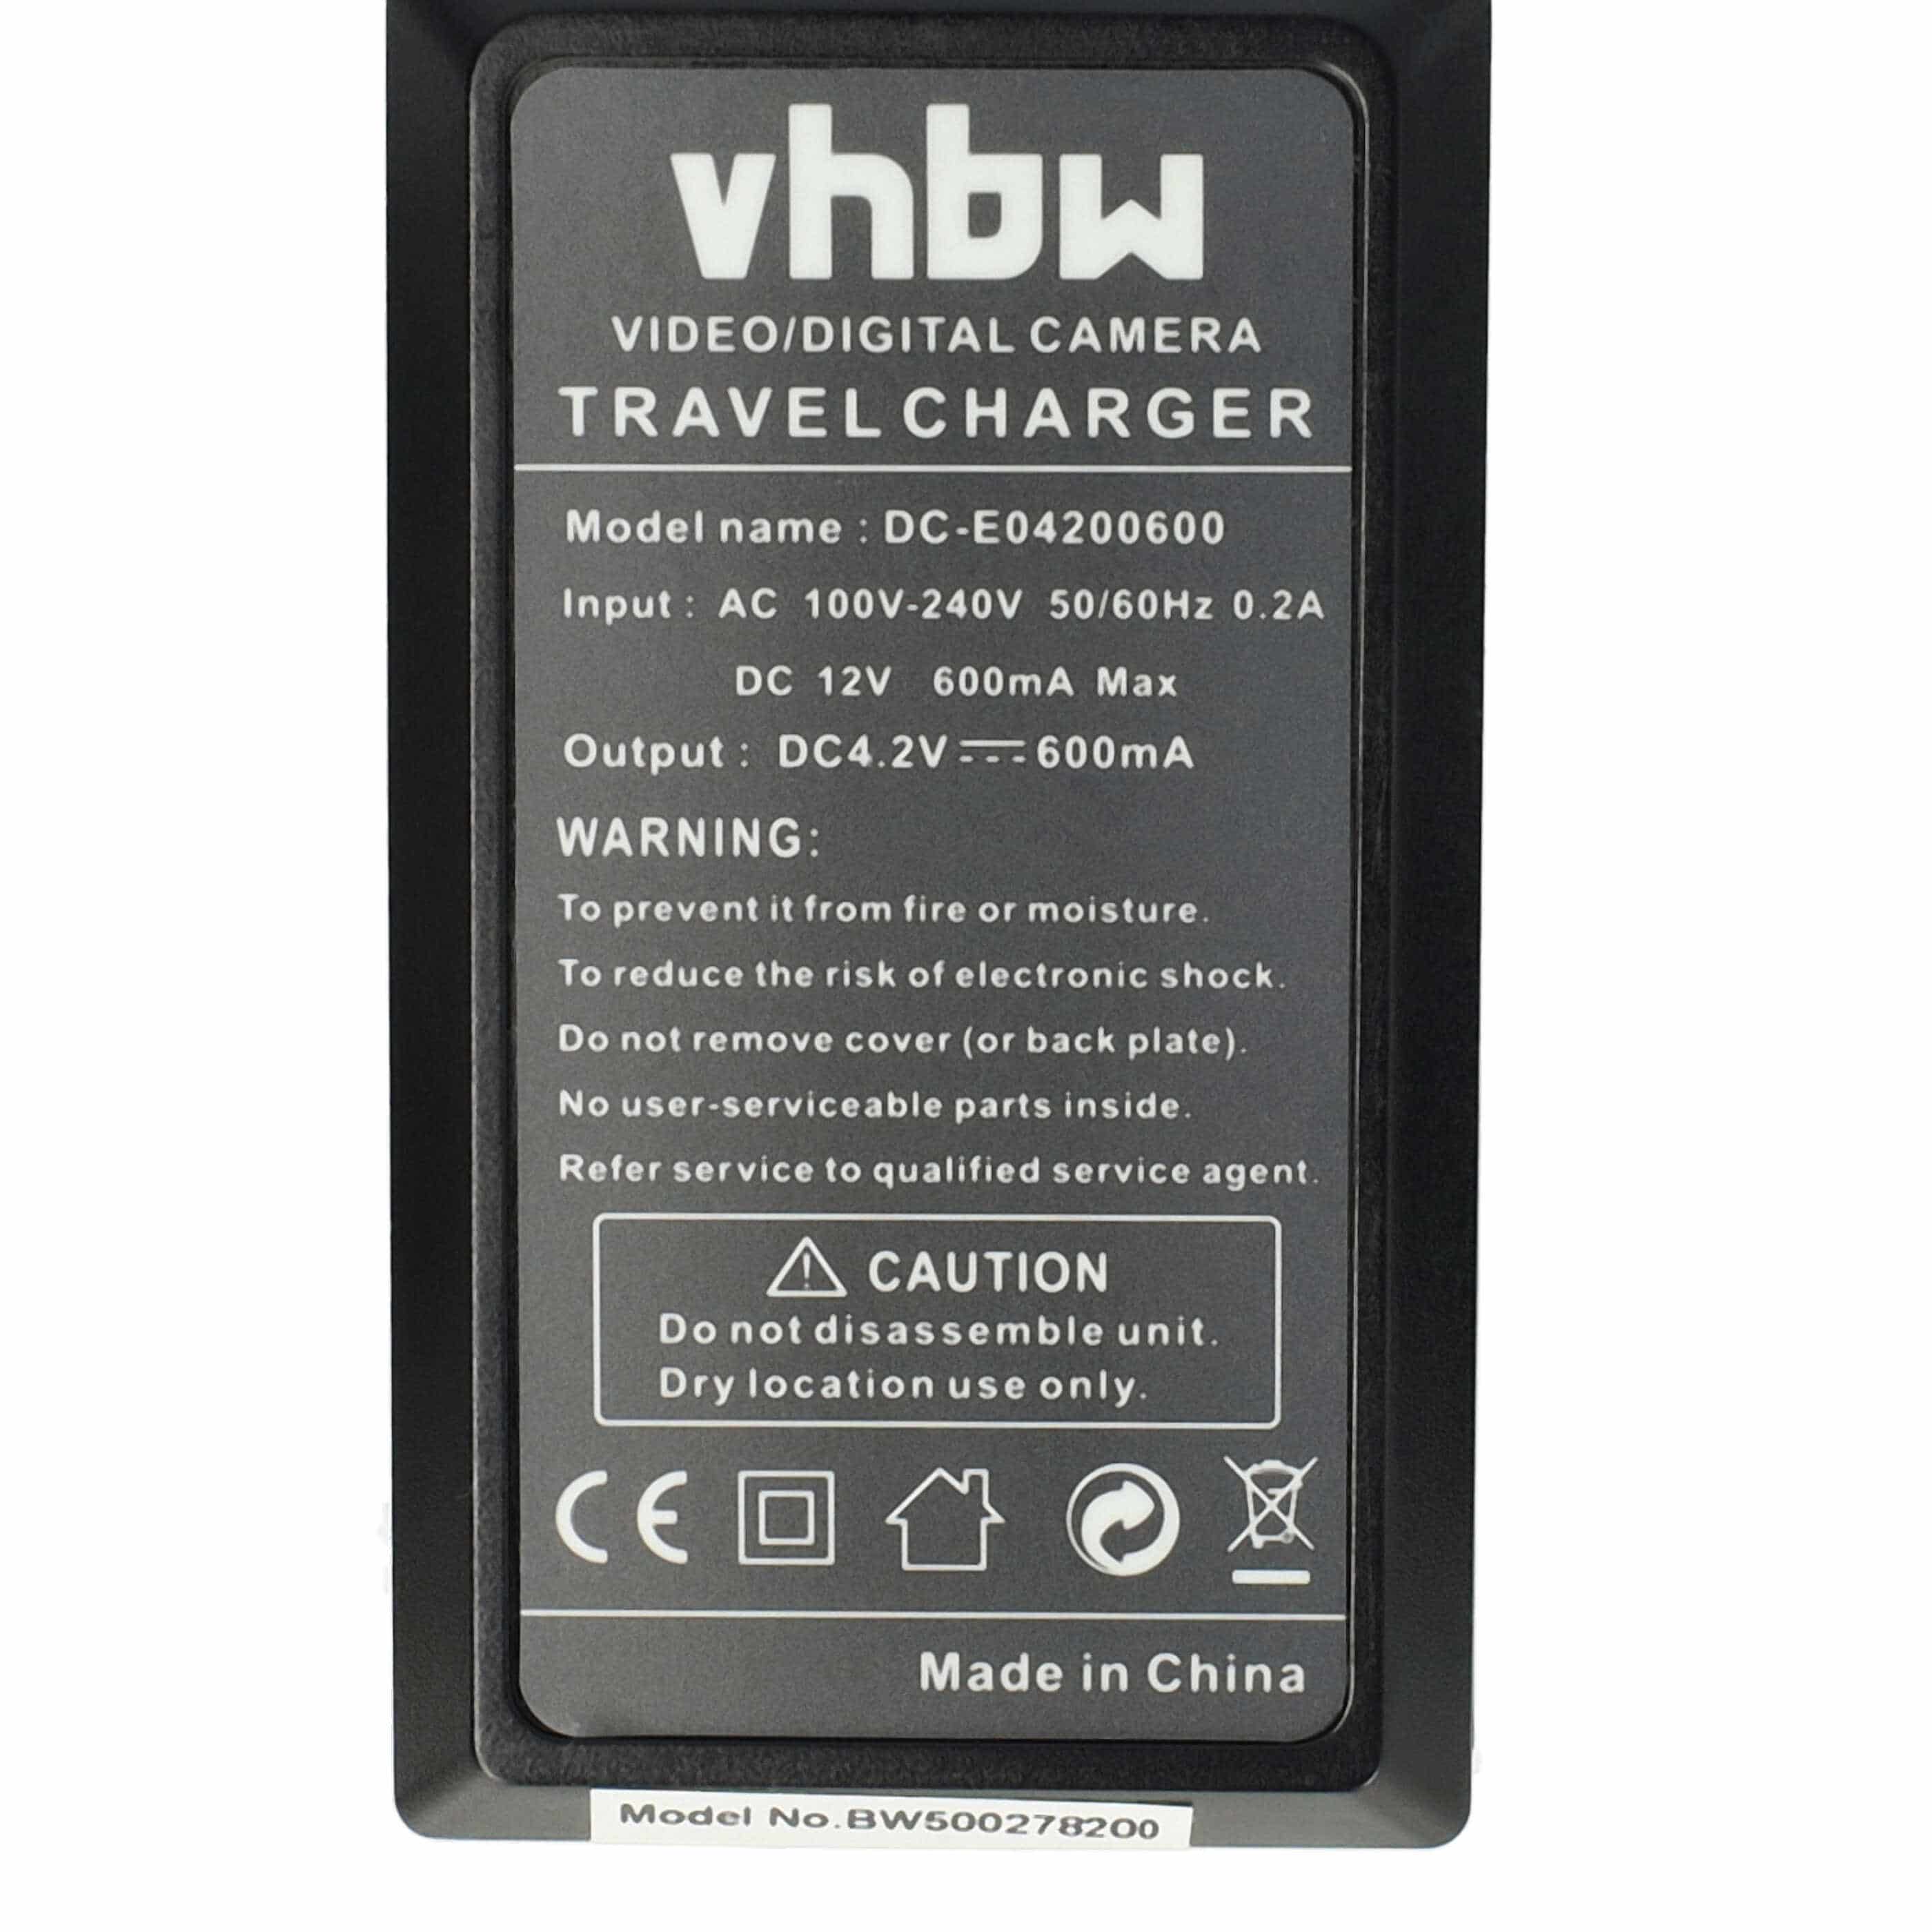 Battery Charger suitable for Pentax D-Li108 Camera etc. - 0.6 A, 4.2 V